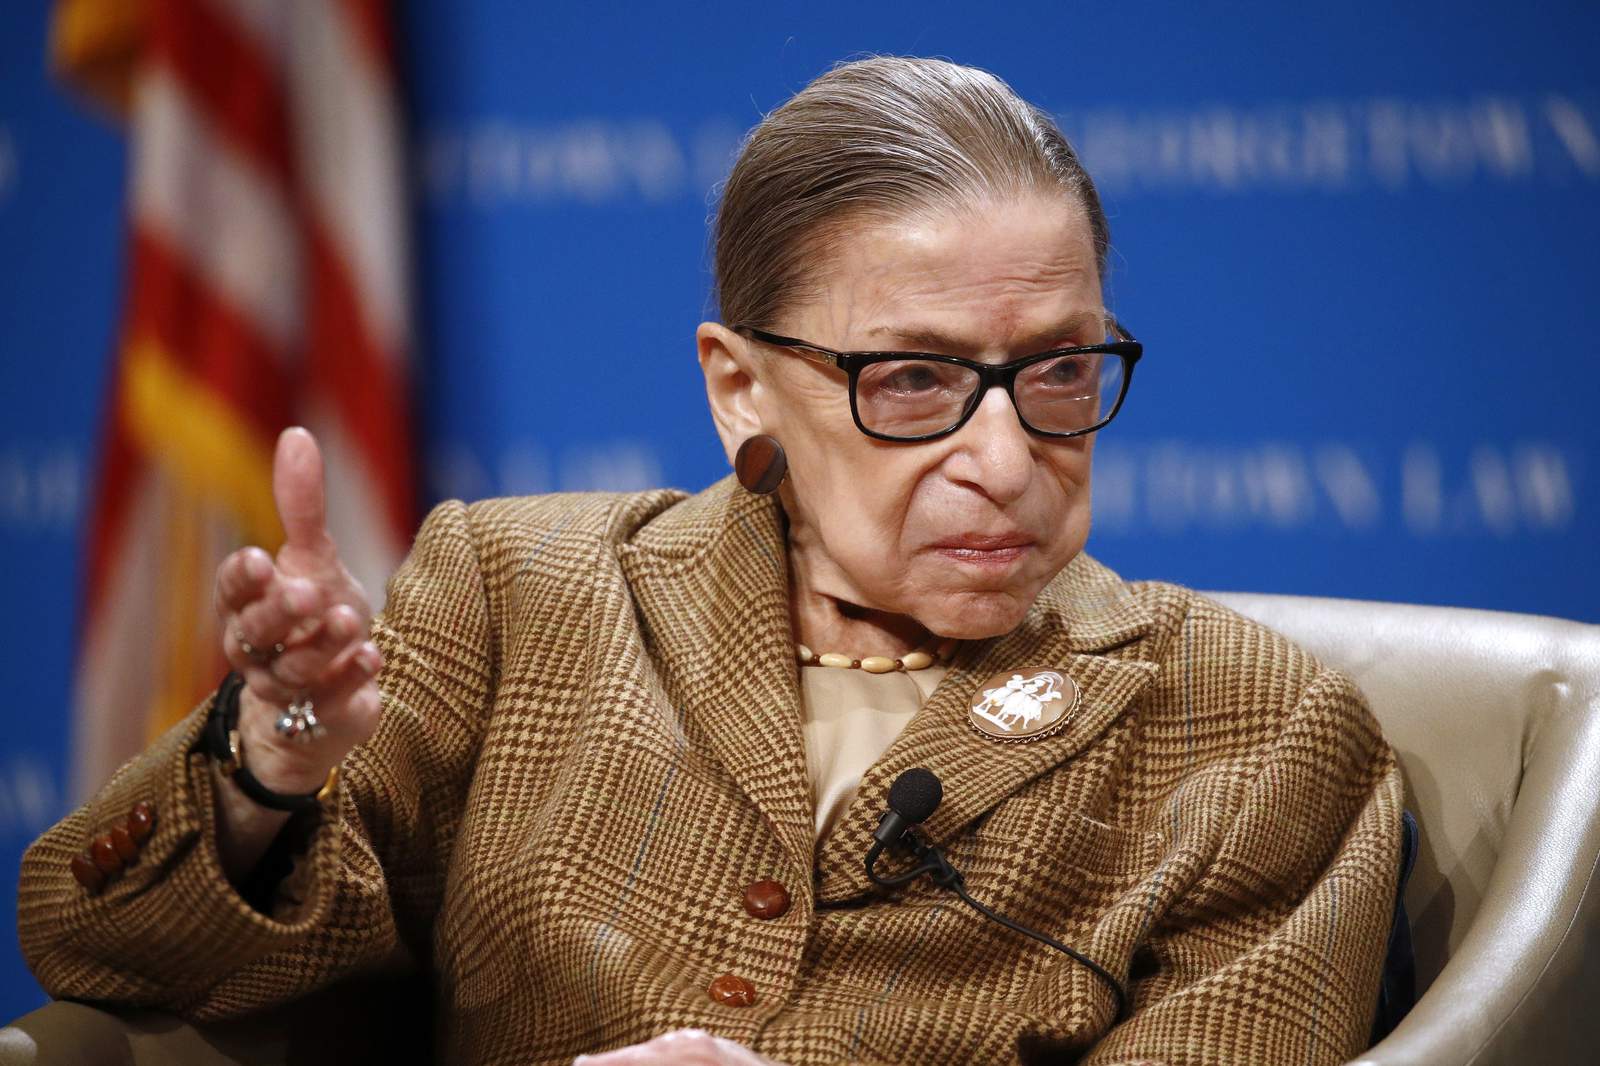 BREAKING: Supreme Court says Justice Ruth Bader Ginsburg has died